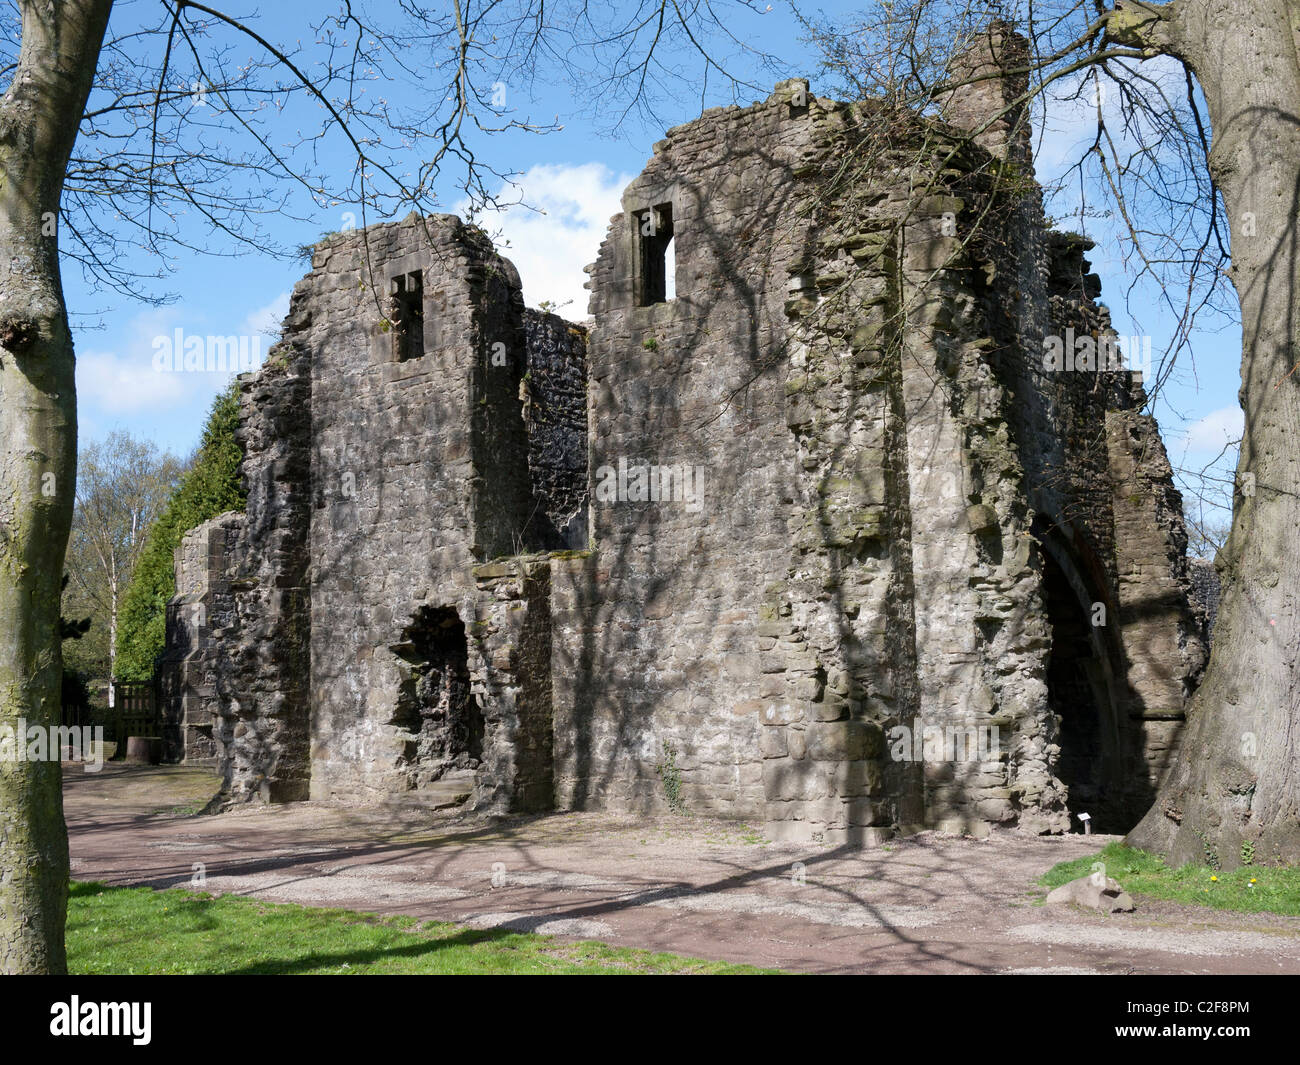 Ruines de Whalley Abbey, Whalley, Clitheroe, Lancashire, England, UK. Banque D'Images